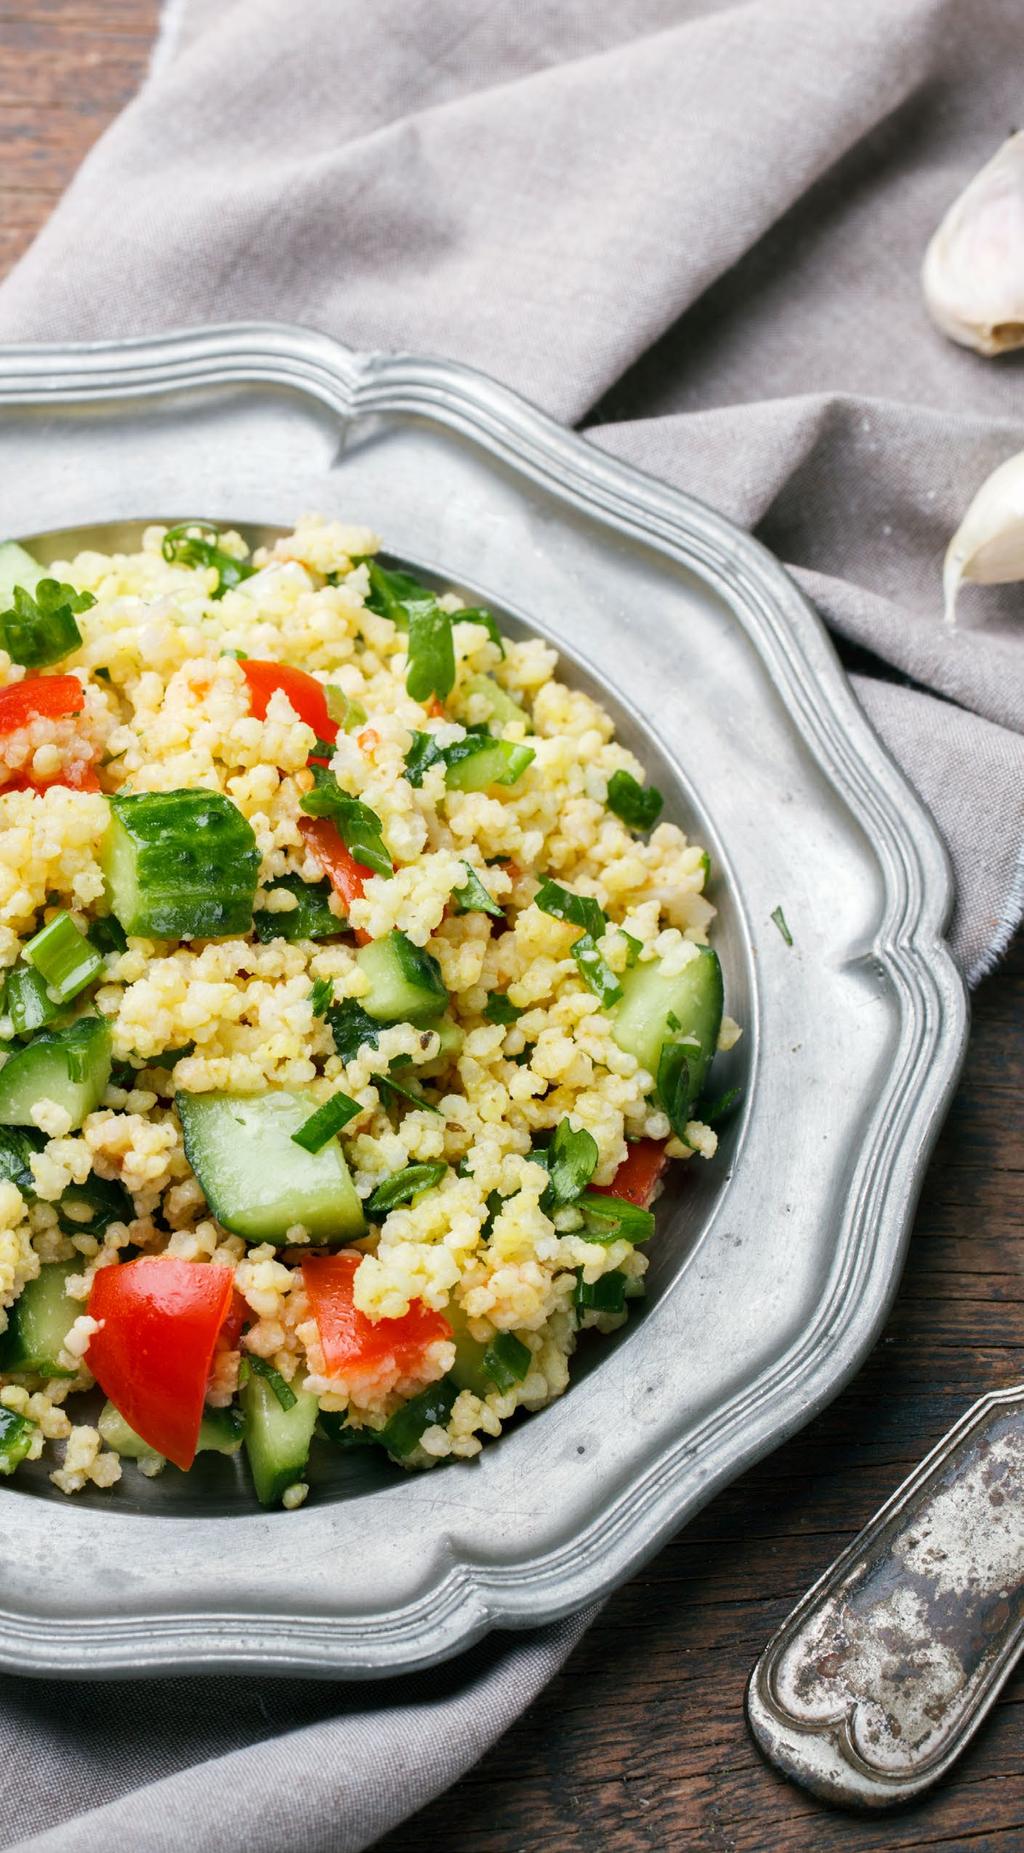 QUINOA TABOULI 4-6 SERVINGS 1 cup uncooked quinoa, rinsed and drained ½ cup chopped scallions 1 cup chopped parsley ¼ cup chopped fresh mint ½ cup quartered grape tomatoes Sea salt and freshly ground